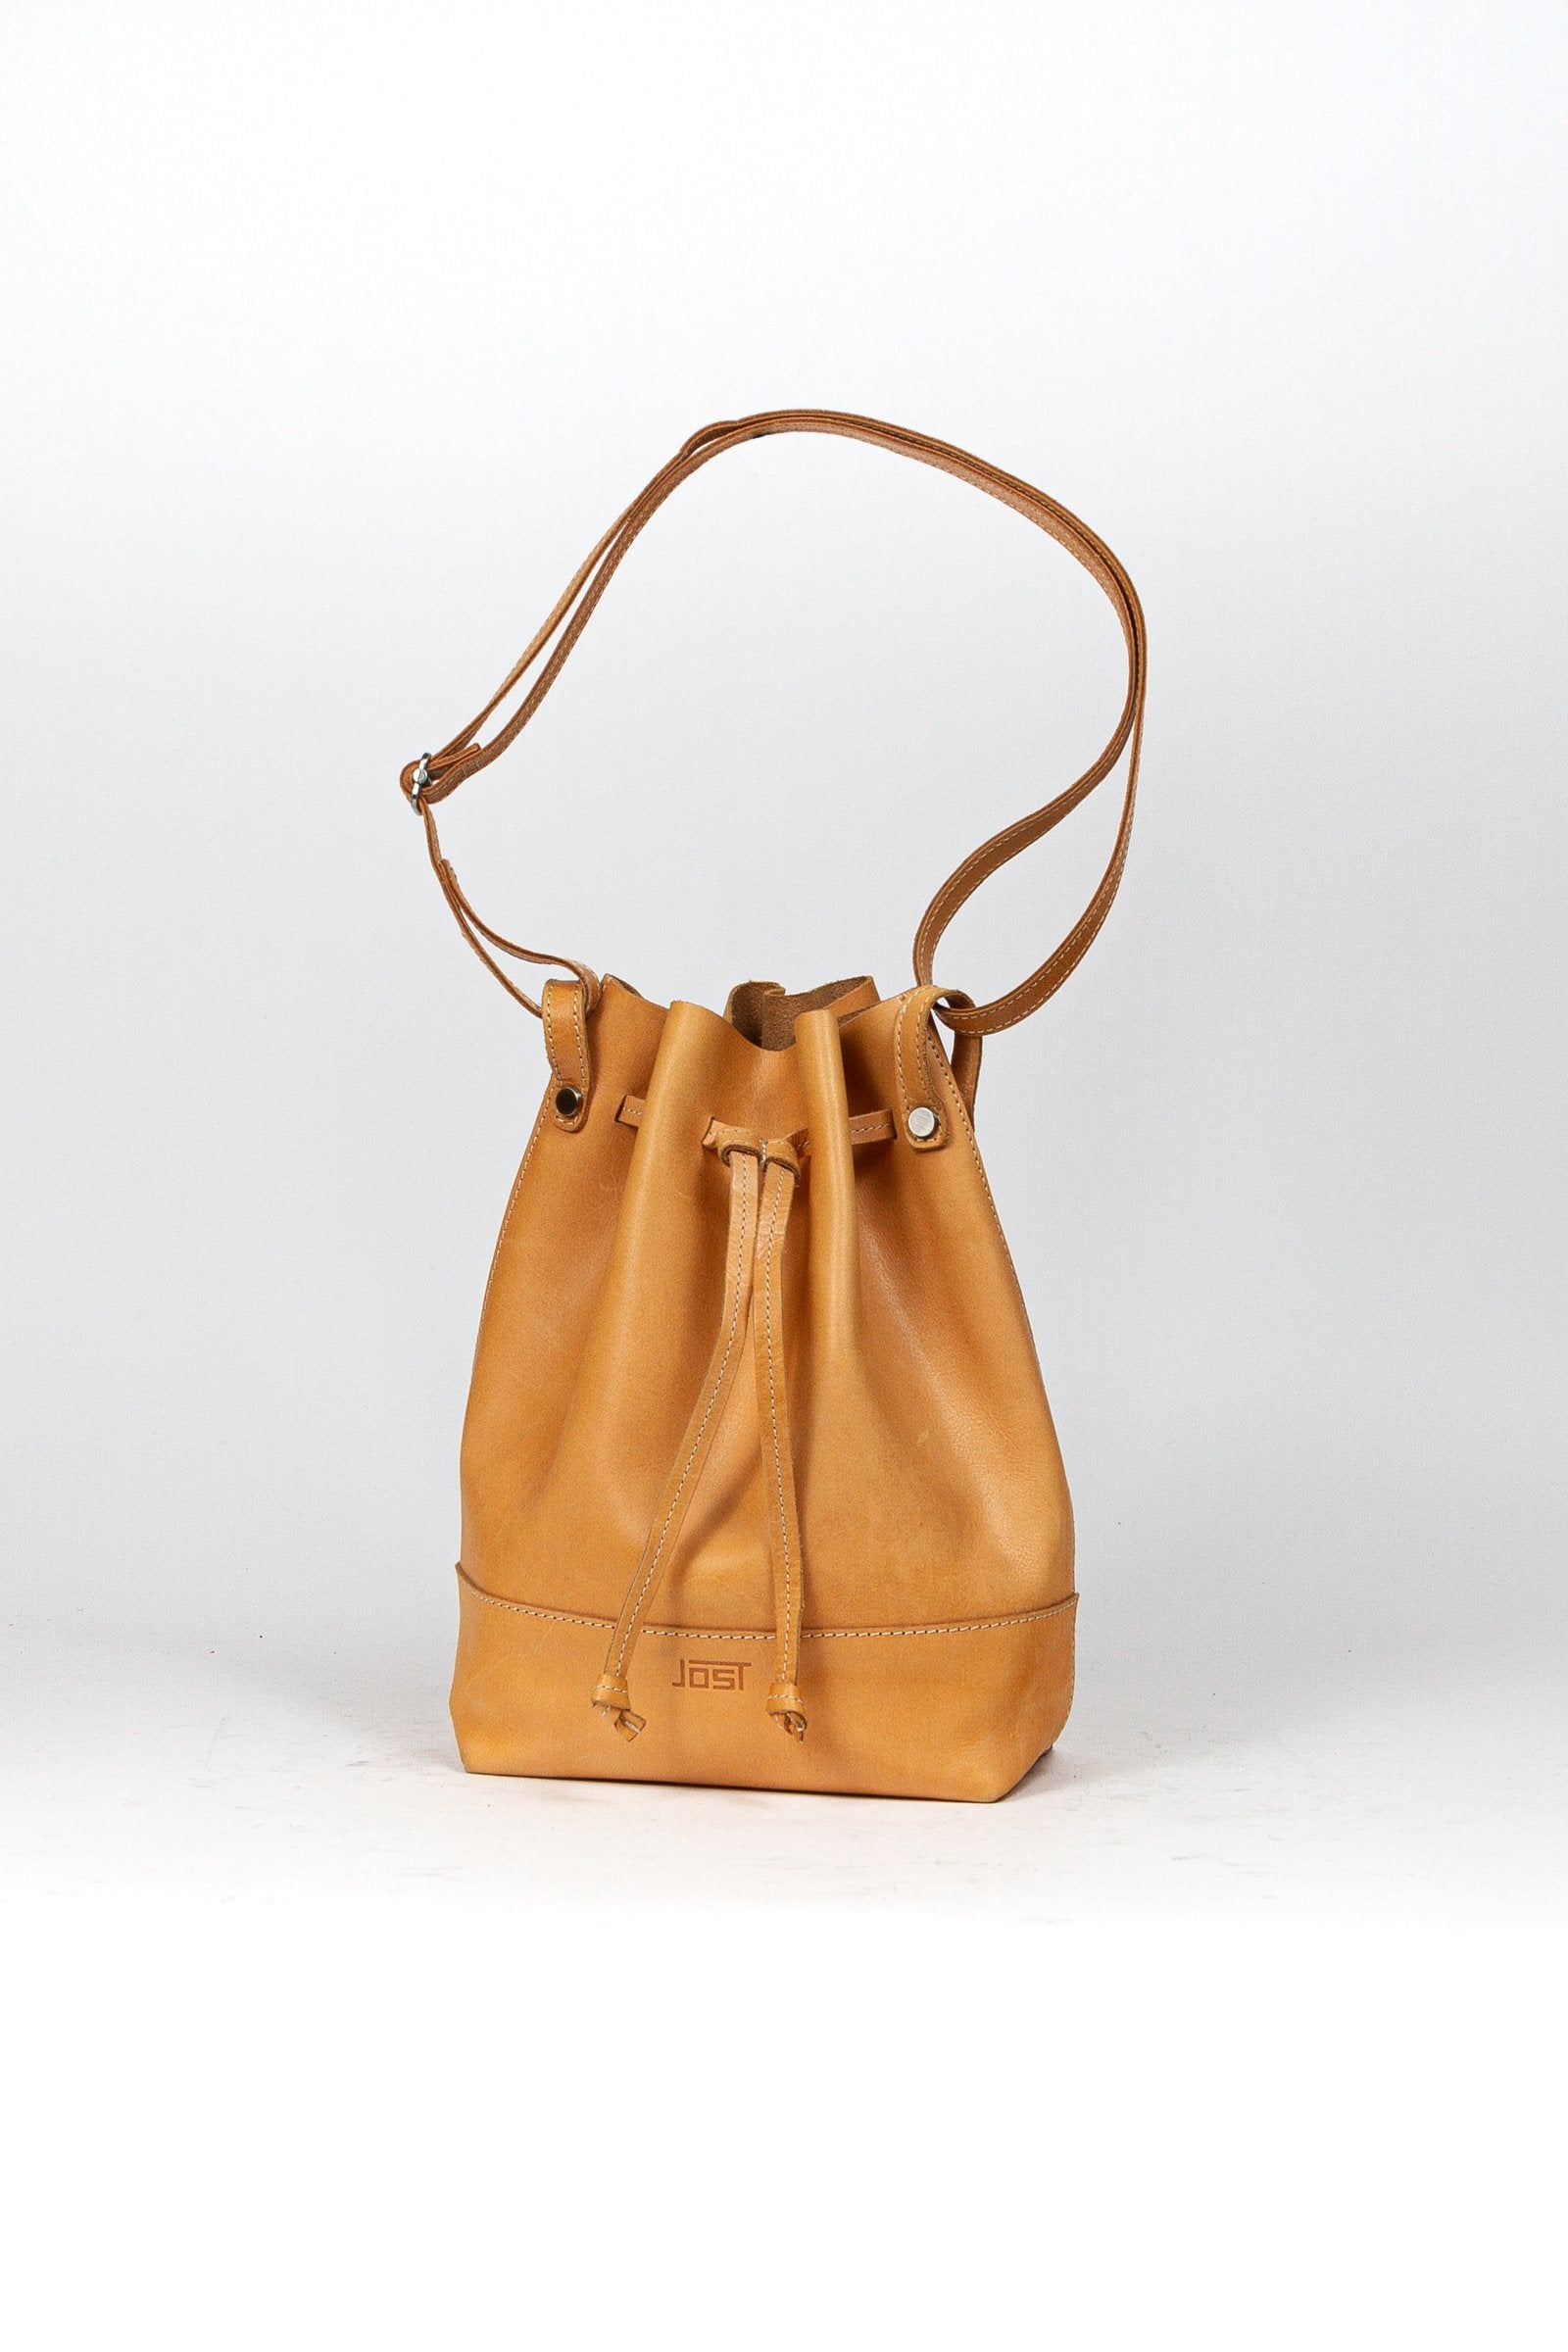 BEON.COM.AU The Jost Vantaa Bucket Bag is a leather bag made in Europe from premium European leathers and fabrics. Vegetable tanned leather (so will age and patina naturally!) Key holder and a removable zipper case Main compartment closes with drawstring Adjustable shoulder strap 66-119 cm  33cm x 22cm x 12c... Jost at BEON.COM.AU